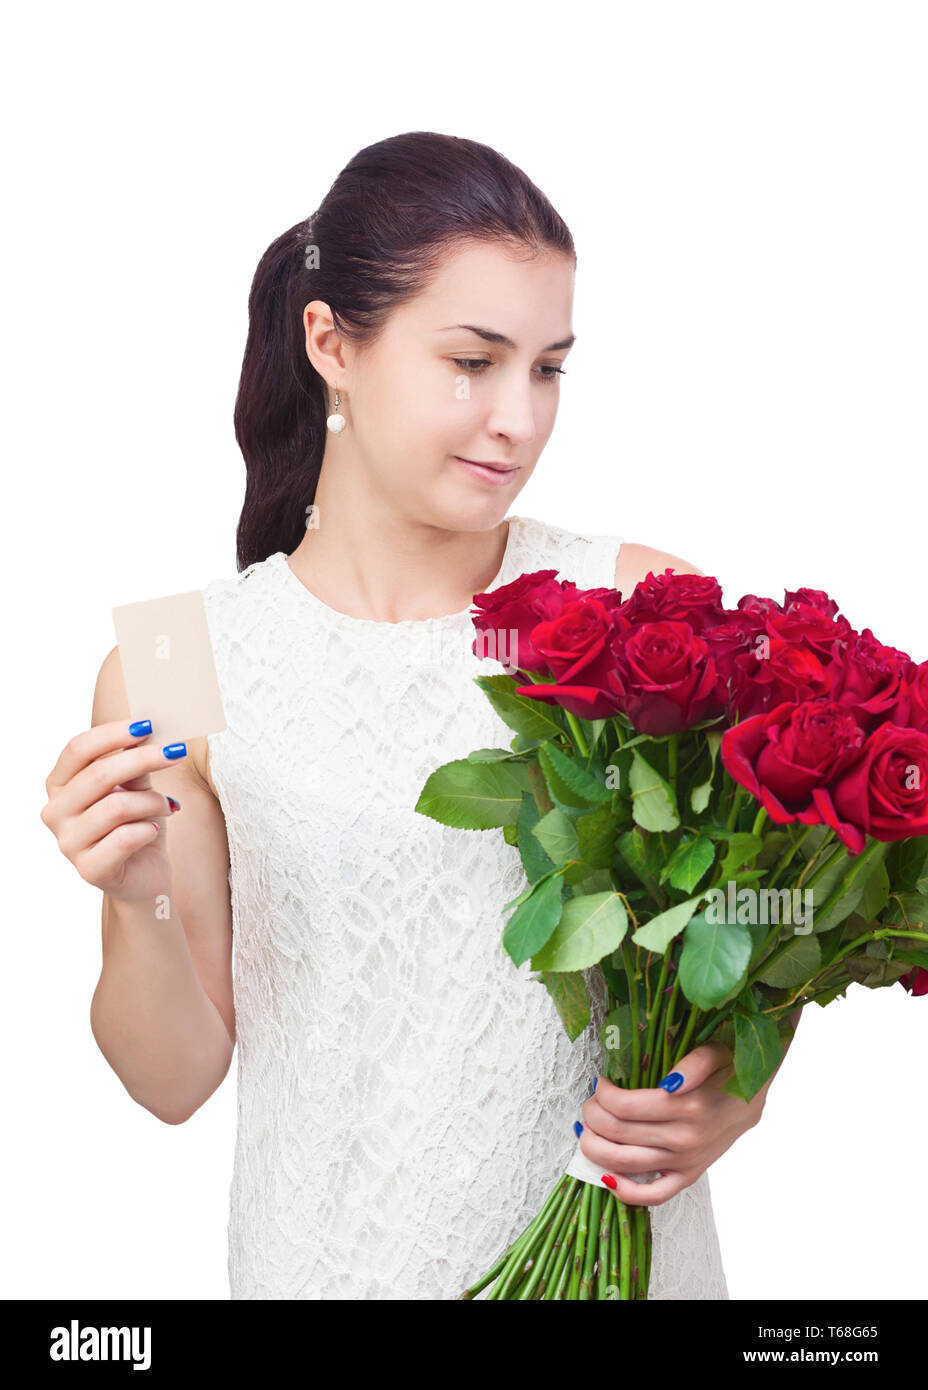 Girl with bouquet of red roses and card in hand. Stock Photo